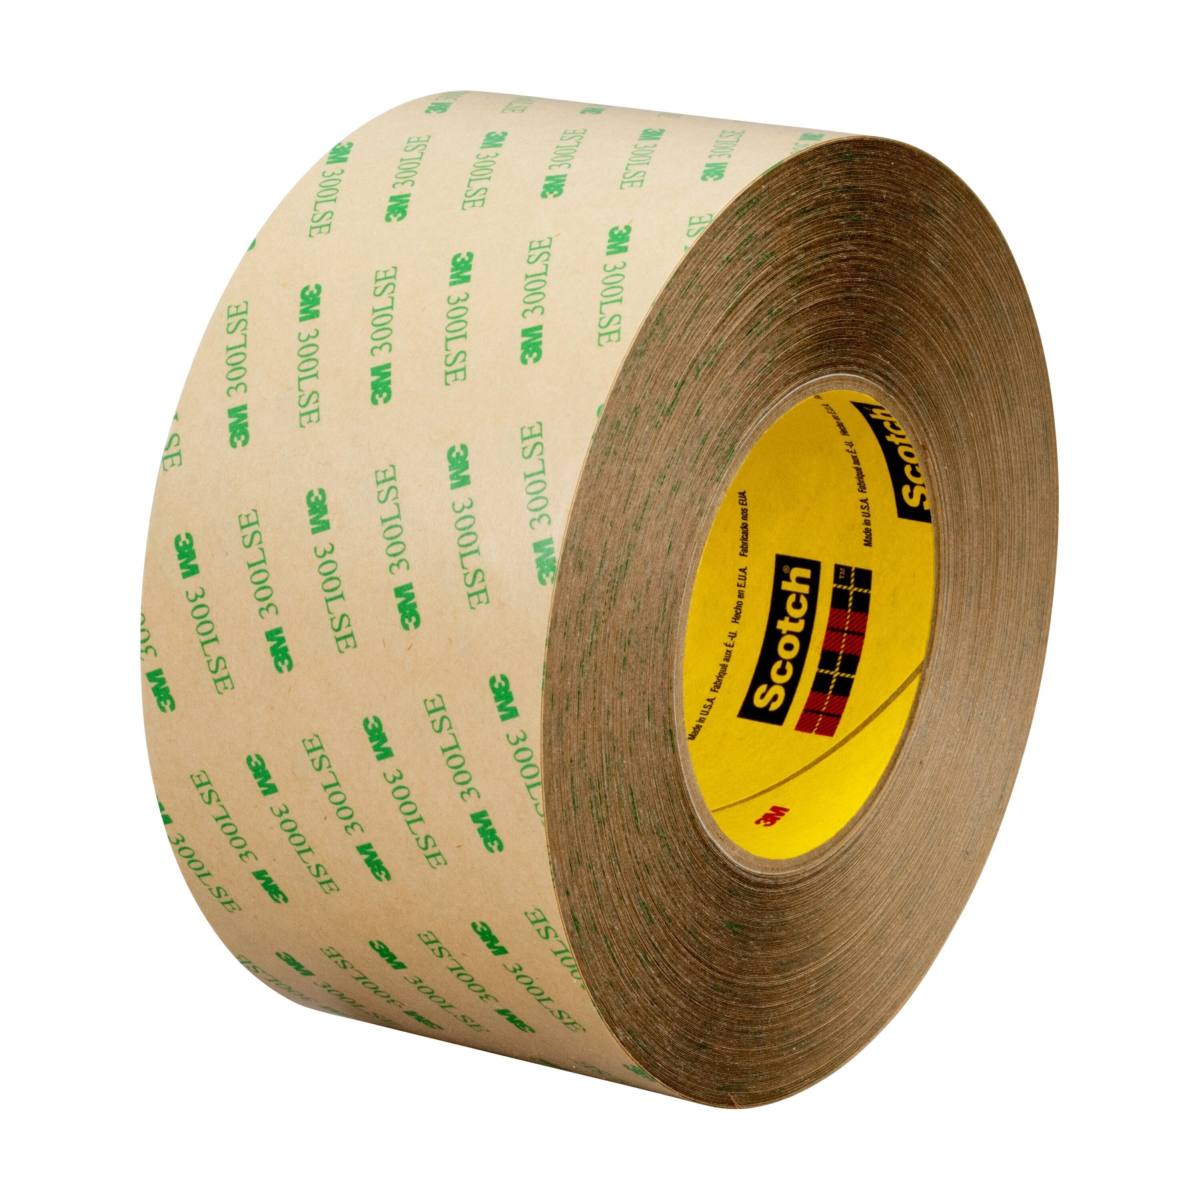 3M Dubbelzijdig plakband met polyester drager 93020LE, transparant, 19 mm x 55 m, 0,20 mm